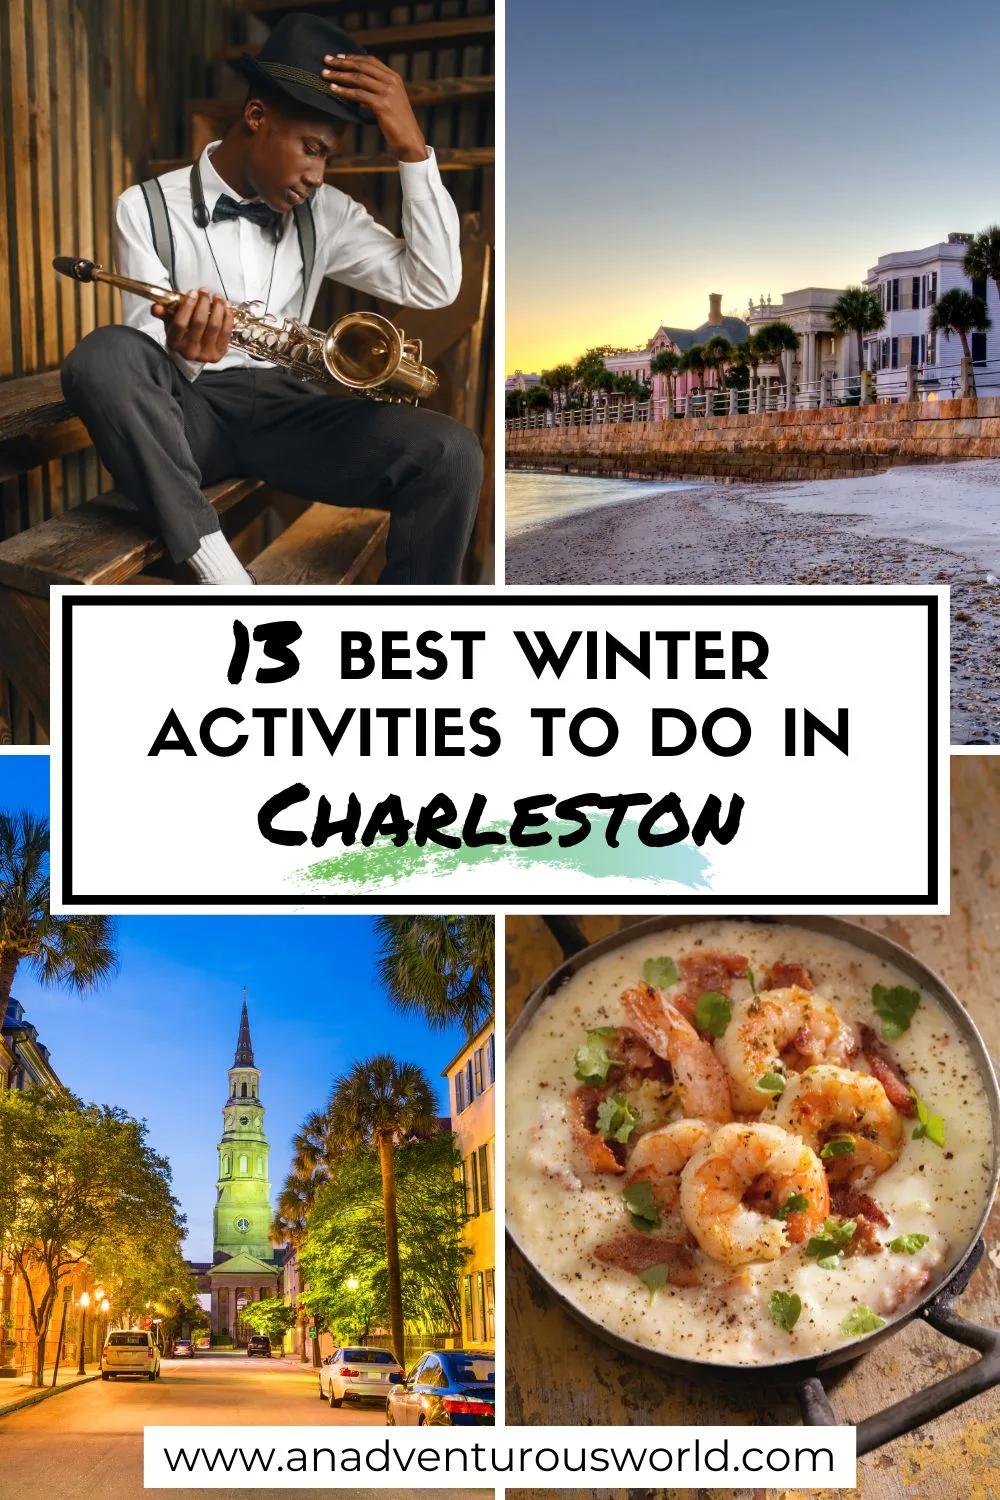 13 BEST Things to do in Charleston in Winter